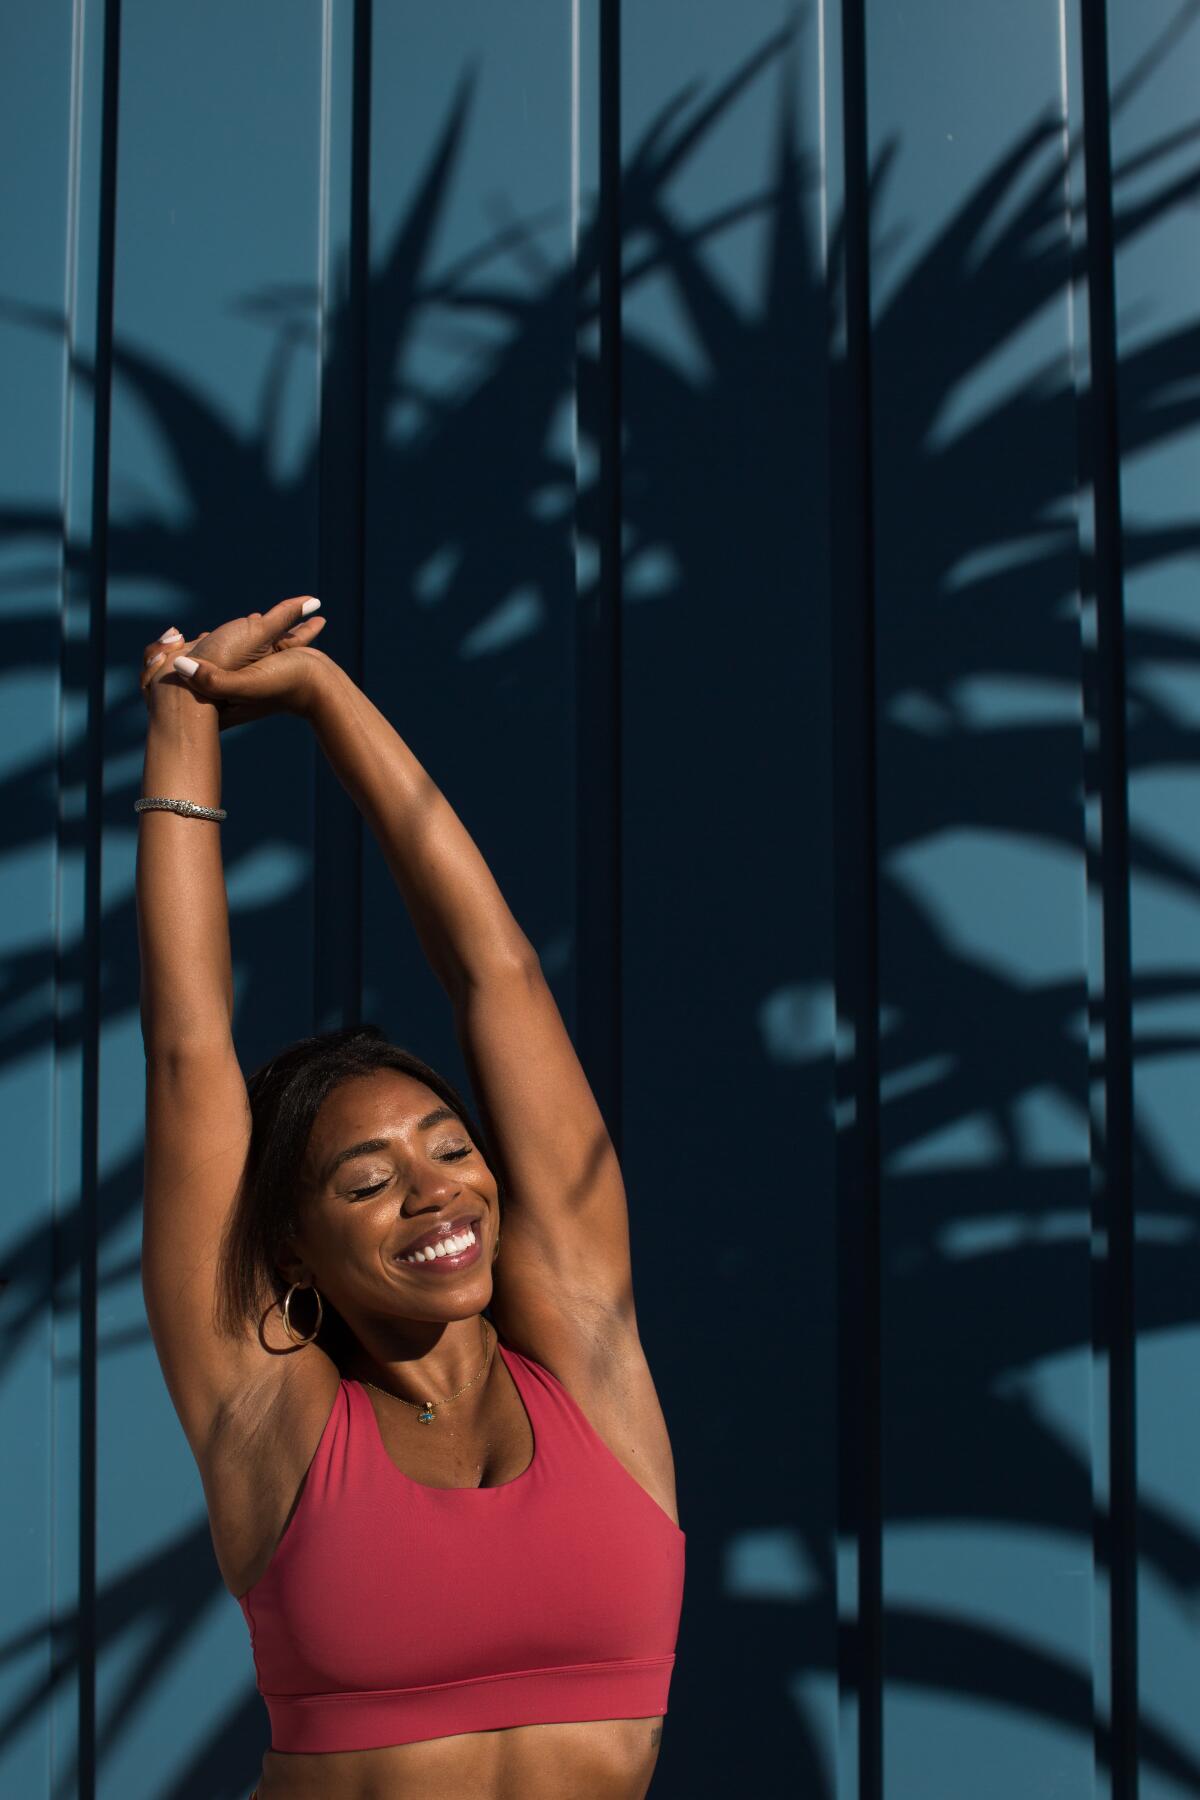 Danielle Richardson, an optometrist turned yoga instructor, stretches in the sun.